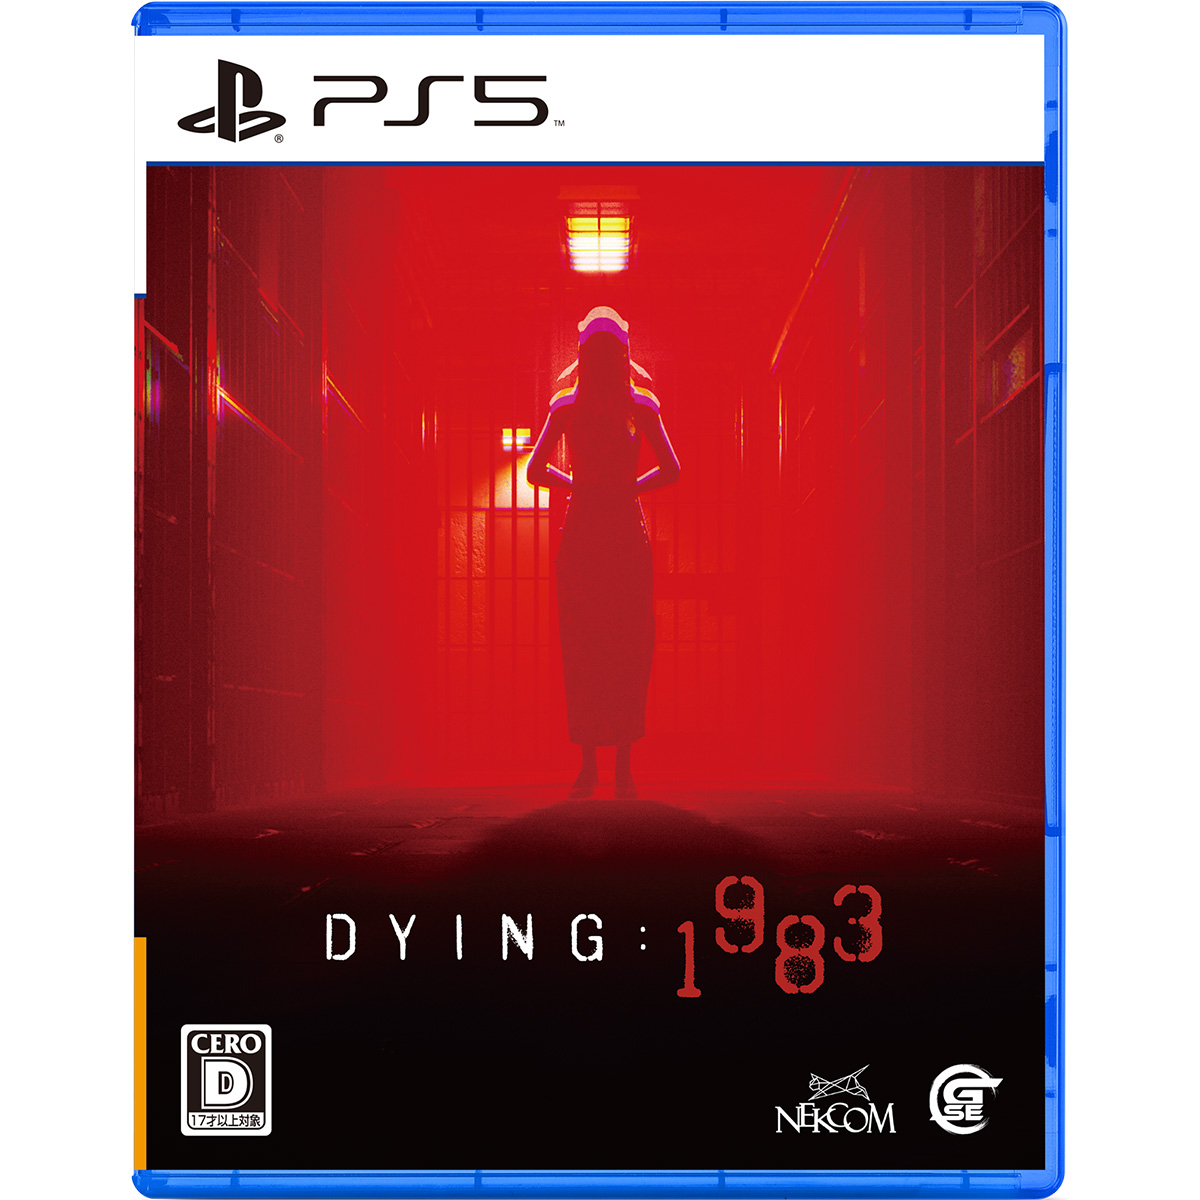 ［PS5］ DYING：1983